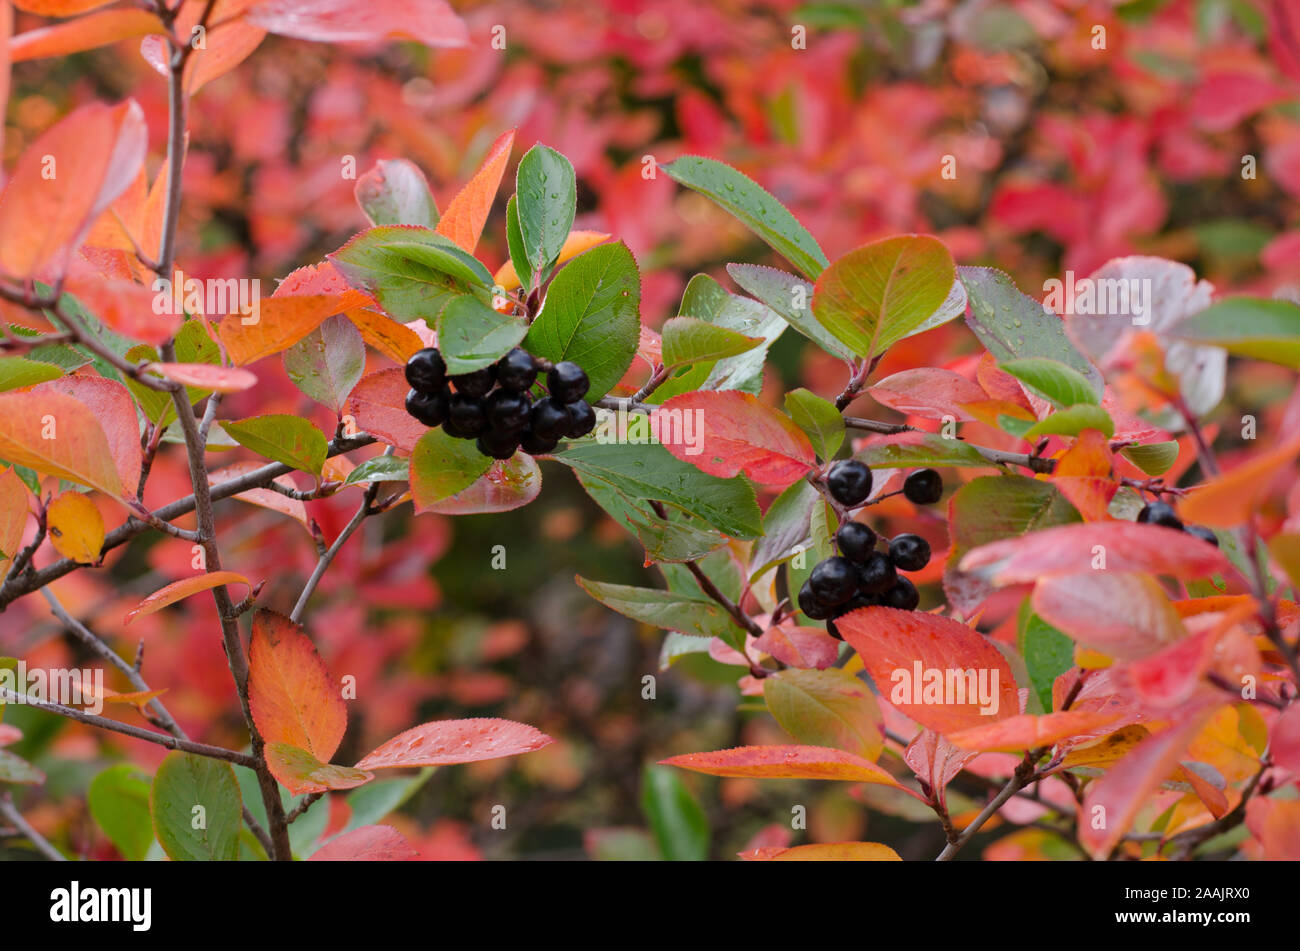 Chokeberries, with colorful leaves, in season in a park. Stock Photo